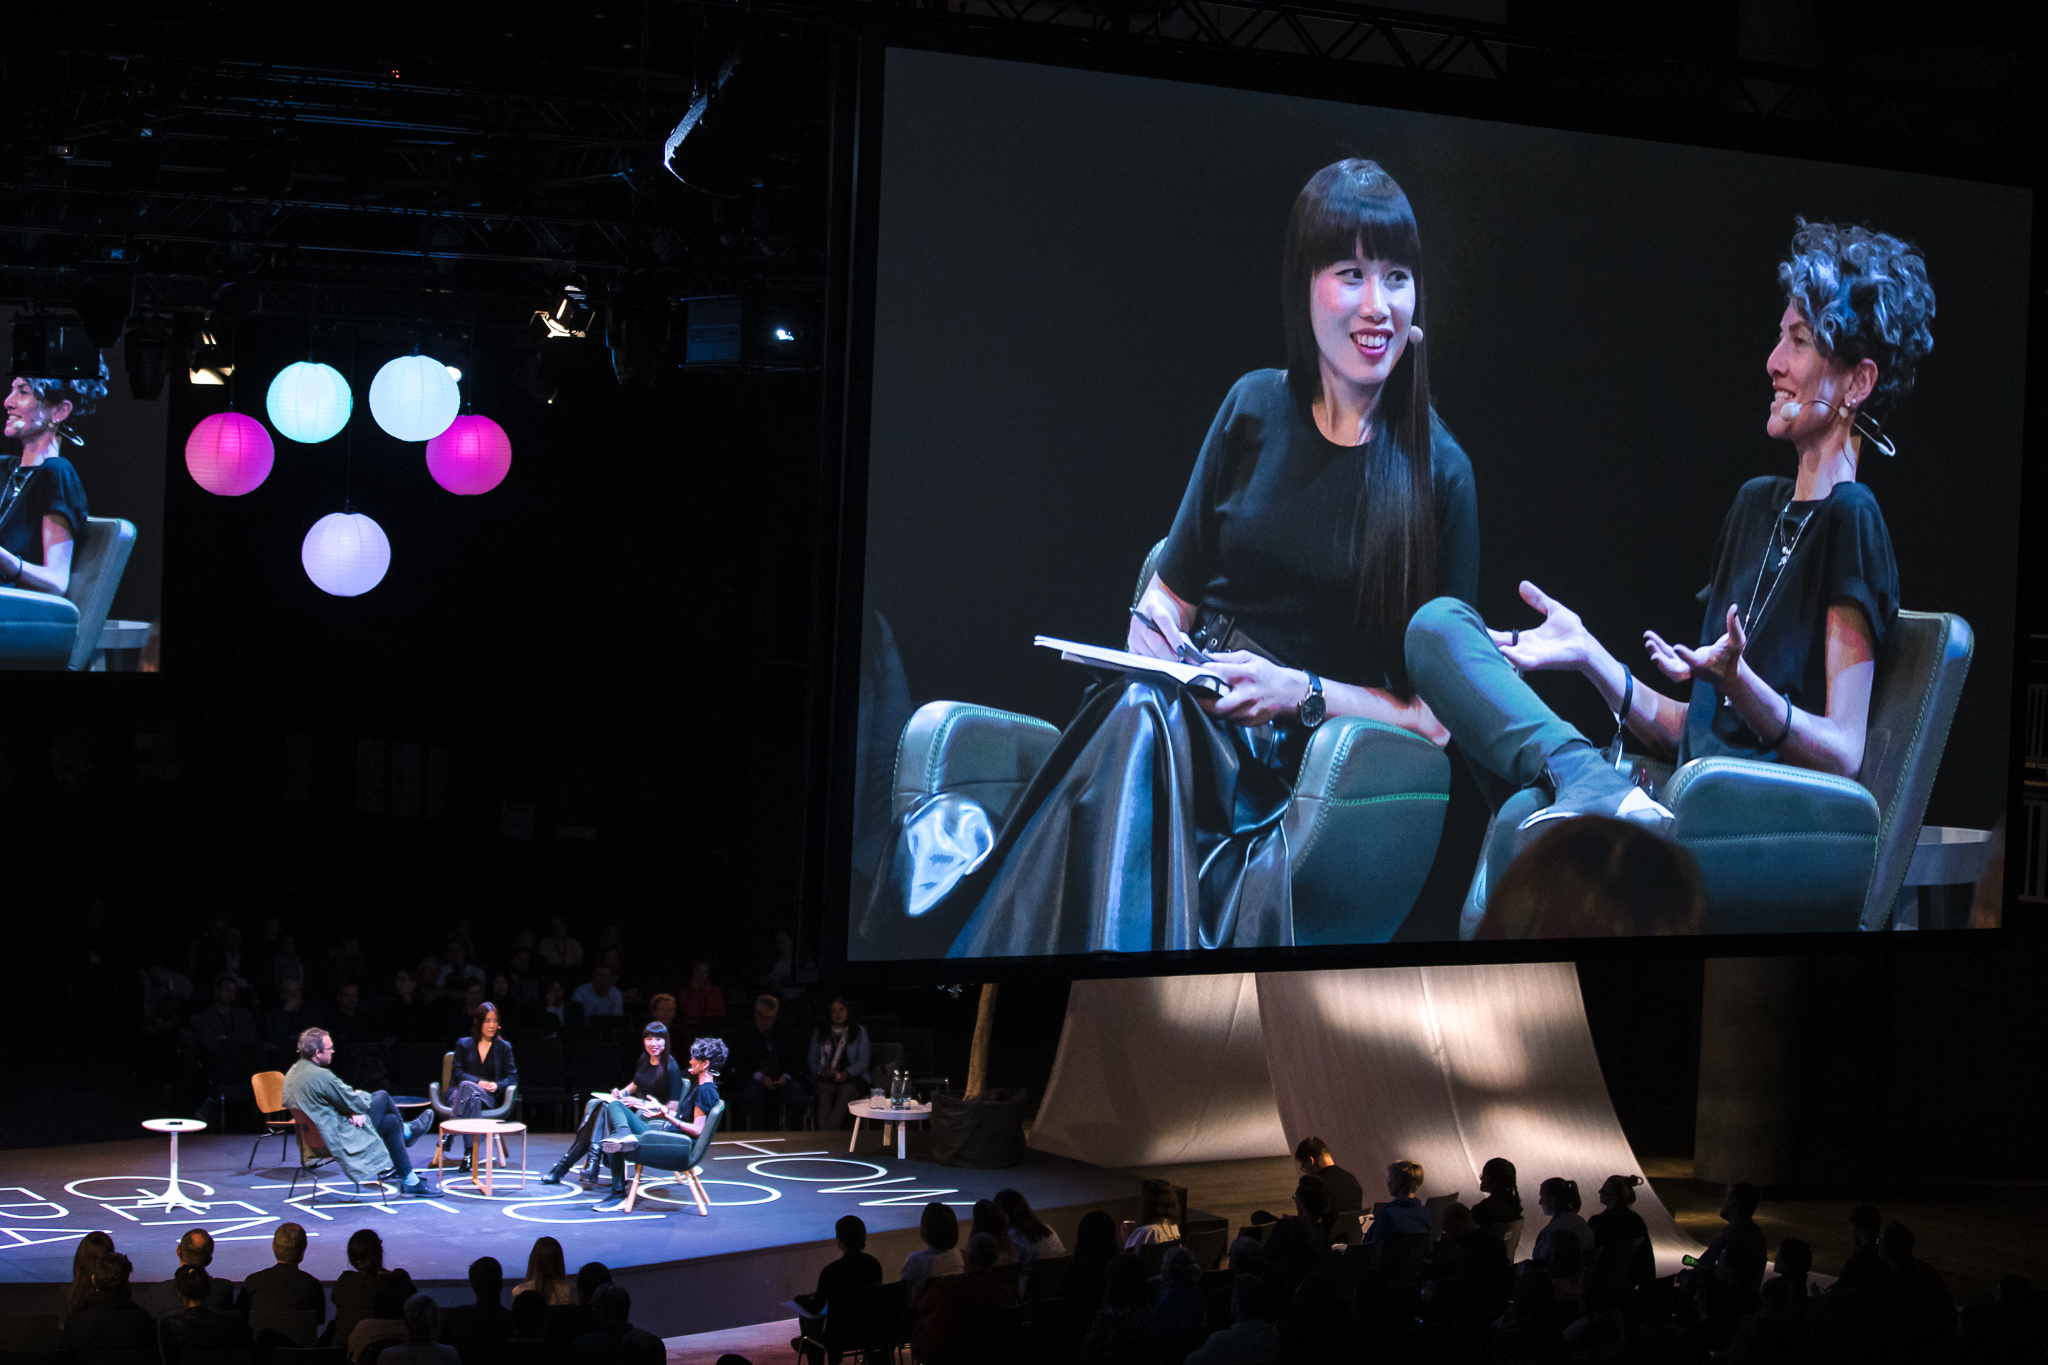 Yoko Choy and Beatrice Leanza in conversation at reSITE